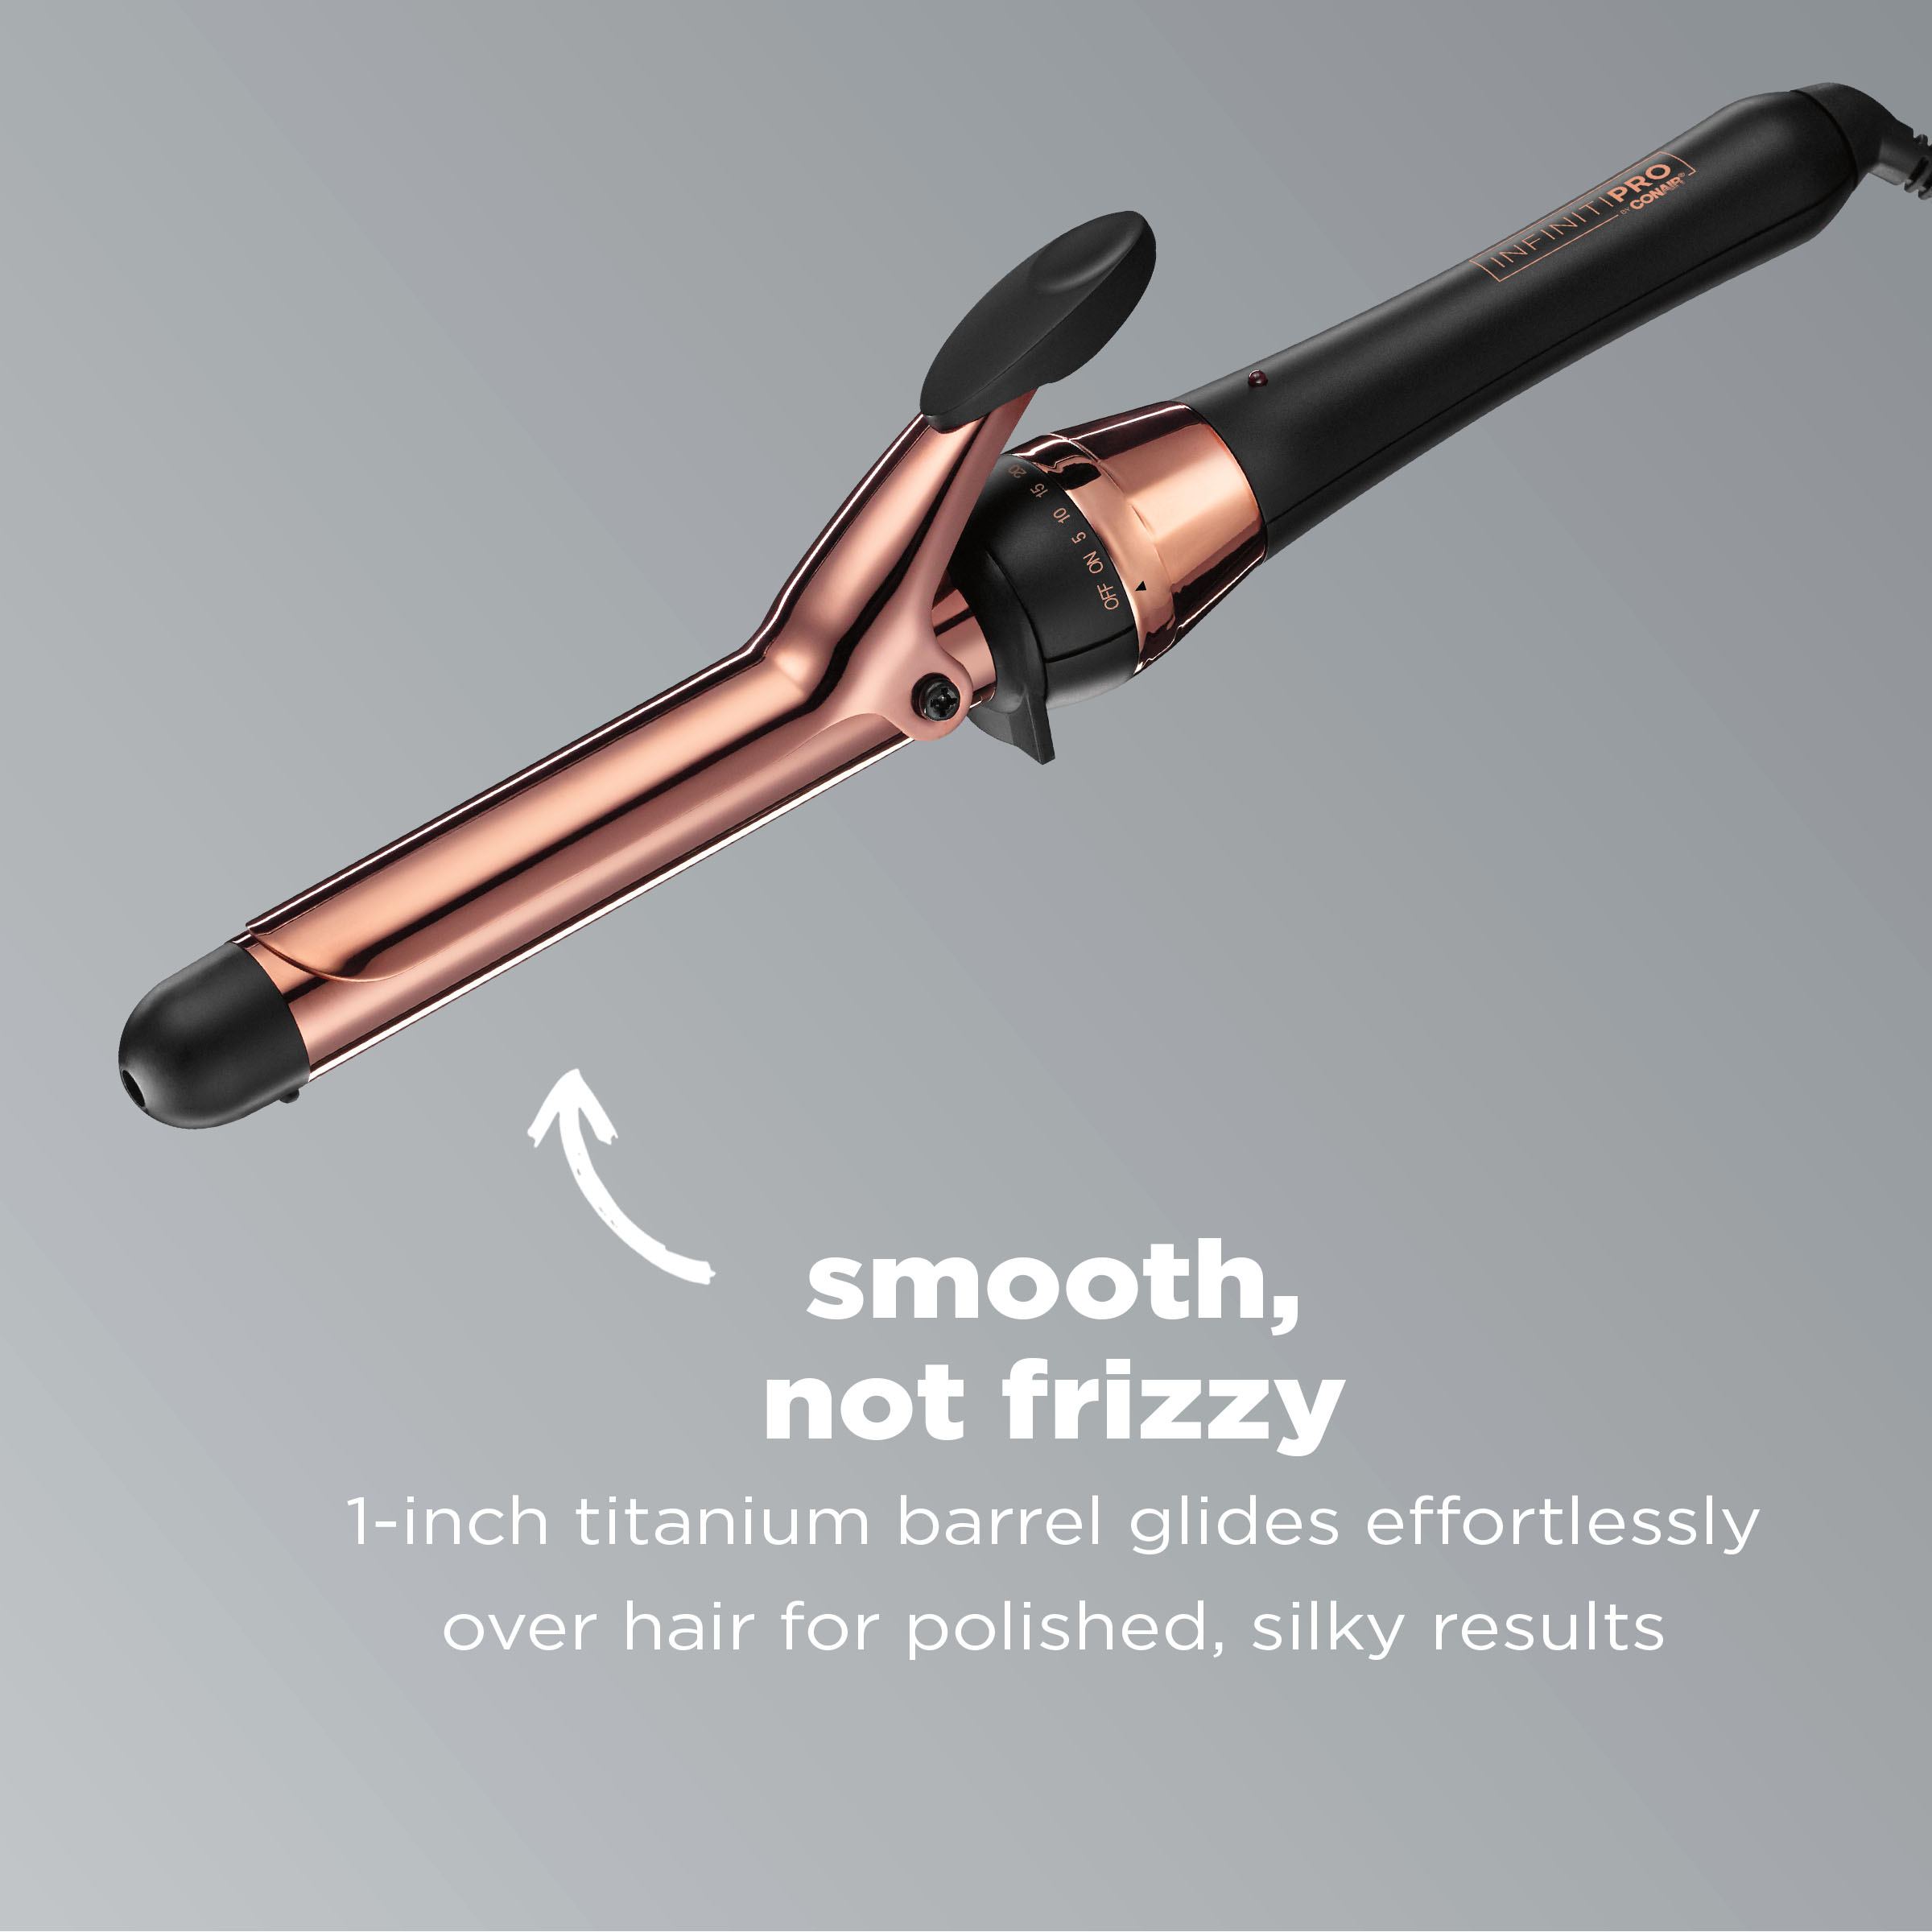 Infinitipro by Conair Rose Gold Titanium 1-Inch Curling Iron CD250N - image 4 of 9